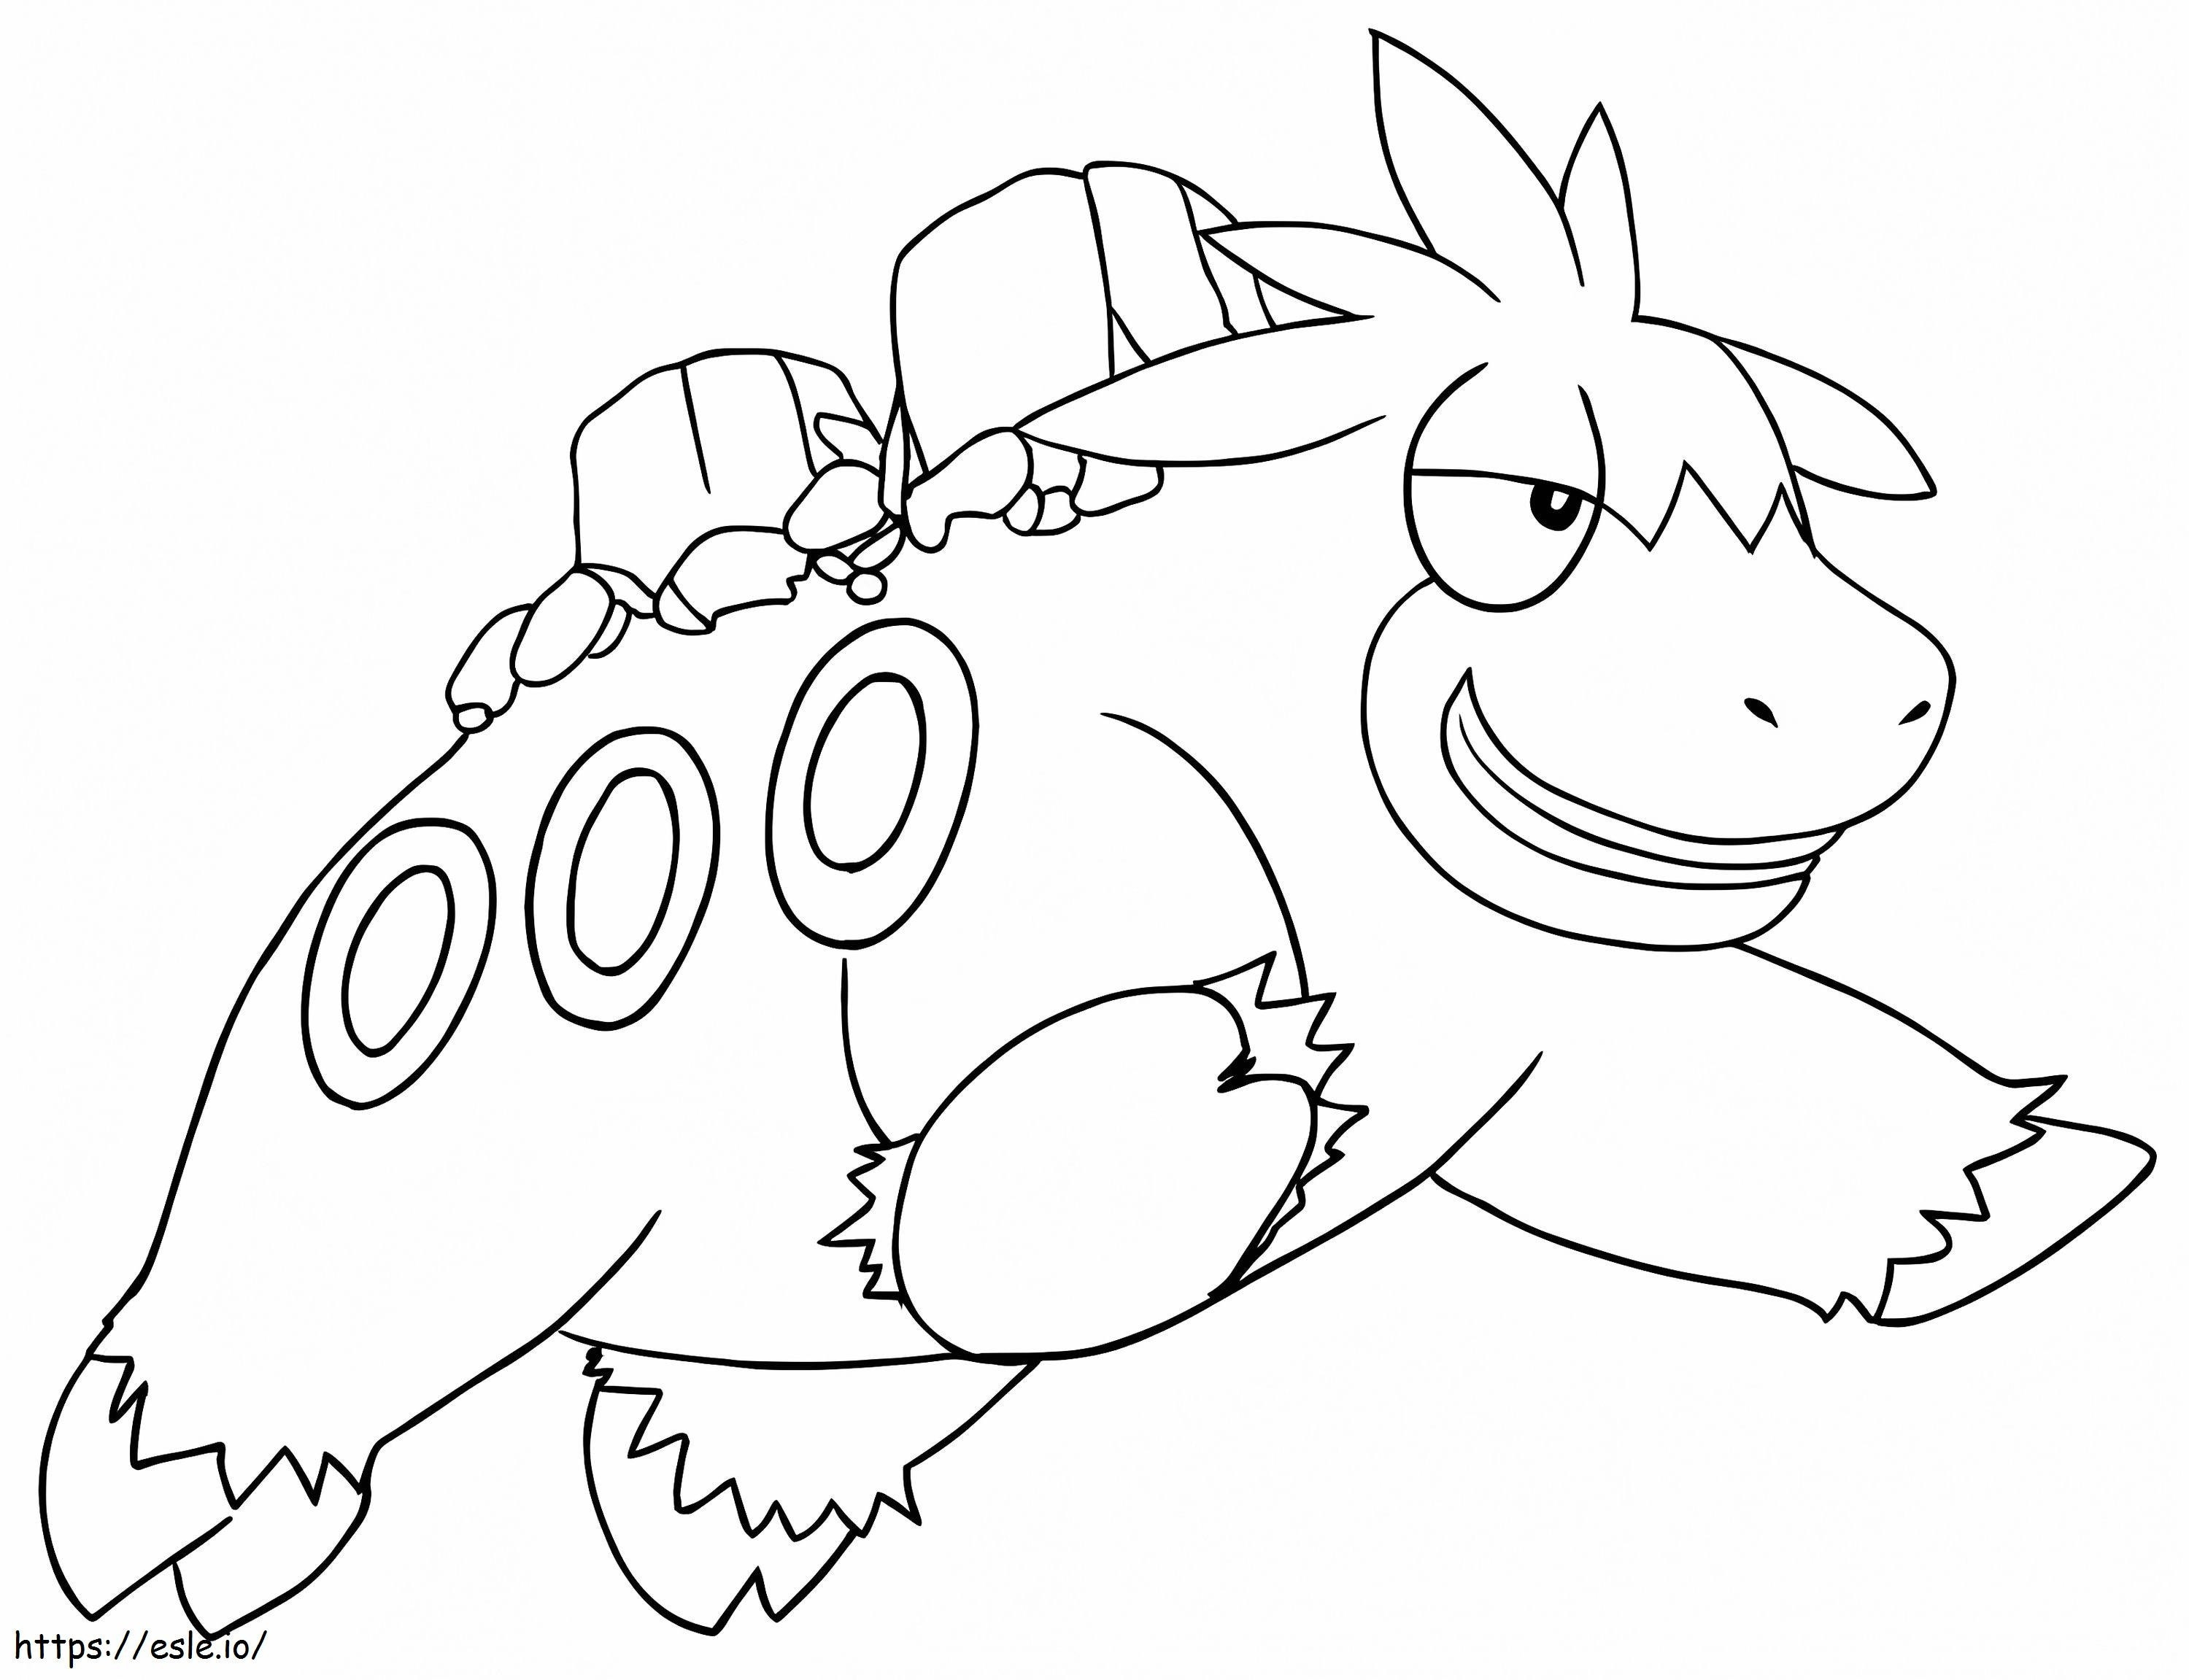 Camerupt Pokemon coloring page